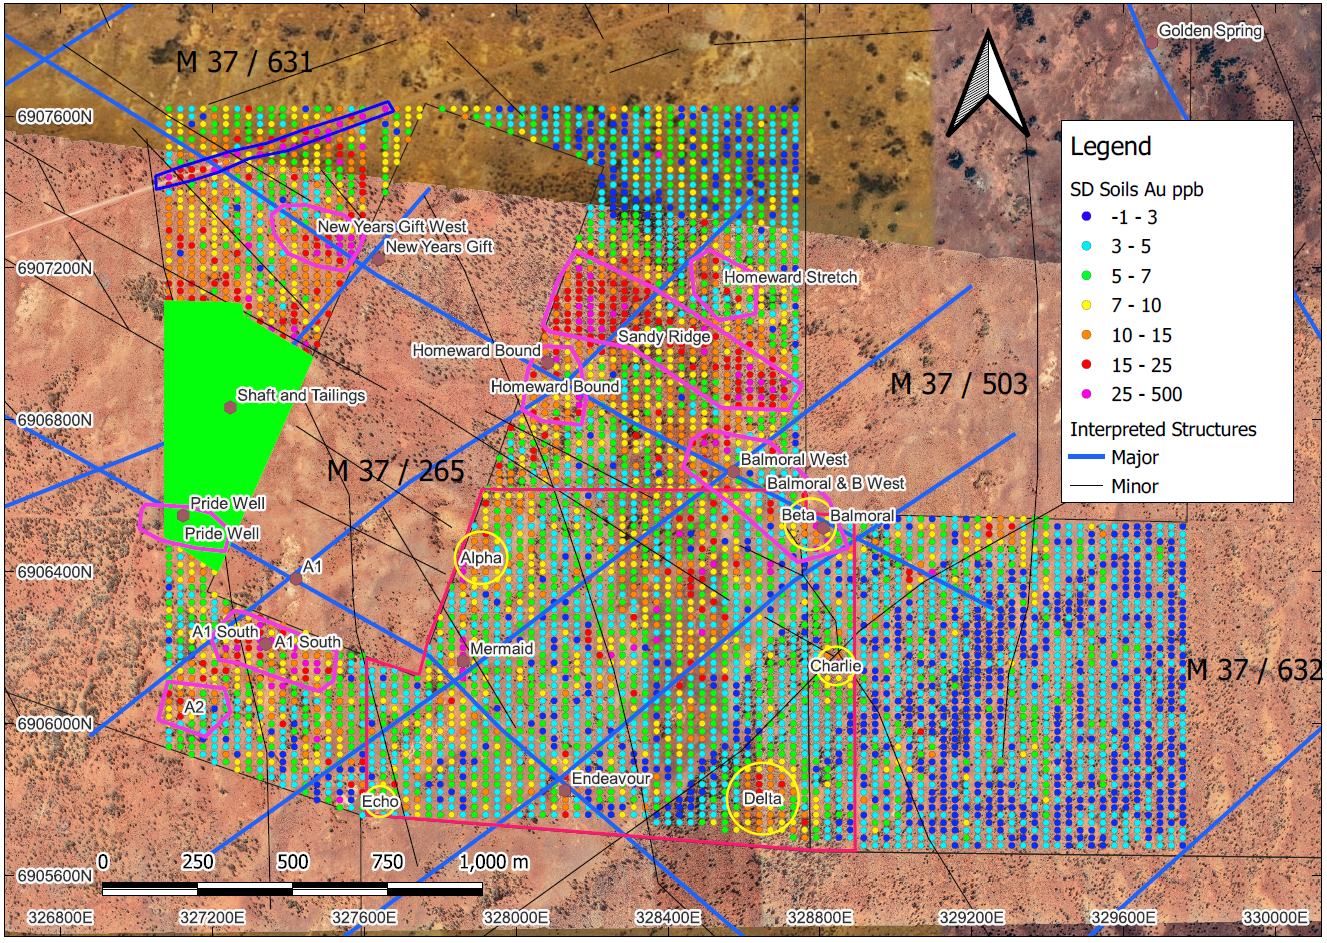 Au (ppb) dispersion in the South Darlot Gold Project with known mineralised deposits and areas of interest highlighted from both soil campaigns. Yellow circled areas were identified in P1 Soil campaign, whilst purple areas identified in P2 Soil campaign.